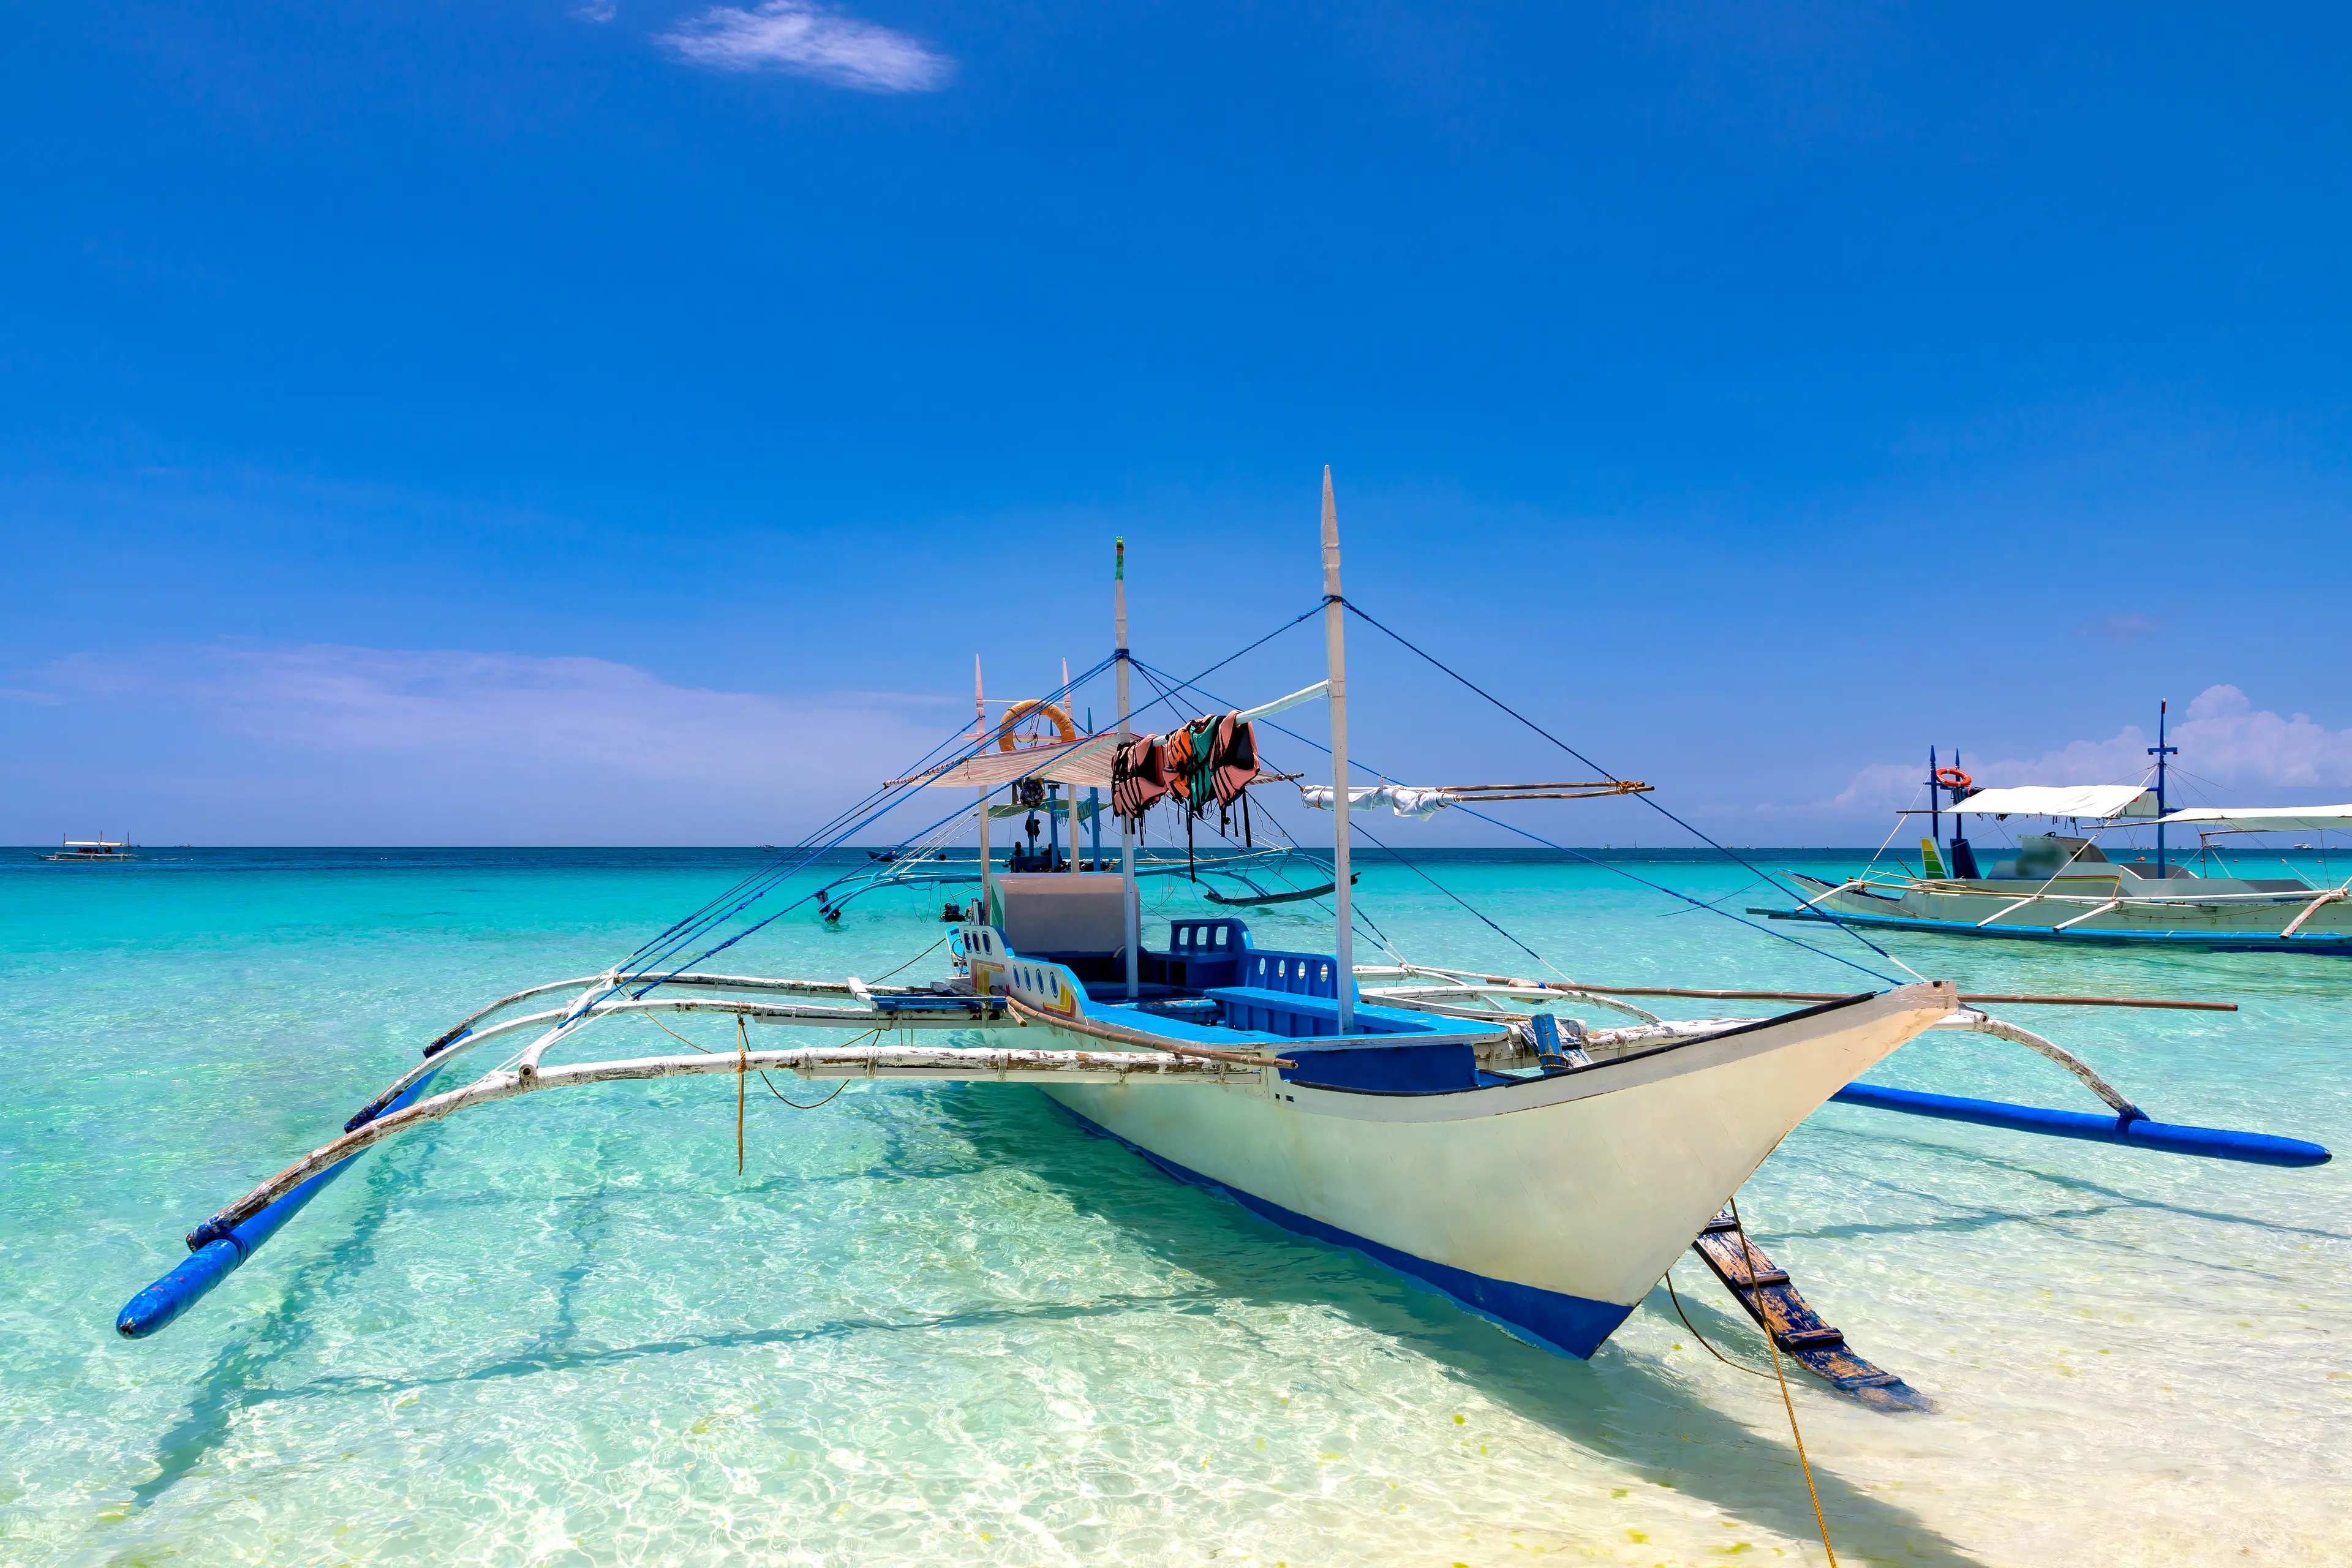 4-Day Solo Exploration and Relaxation in Boracay, Philippines